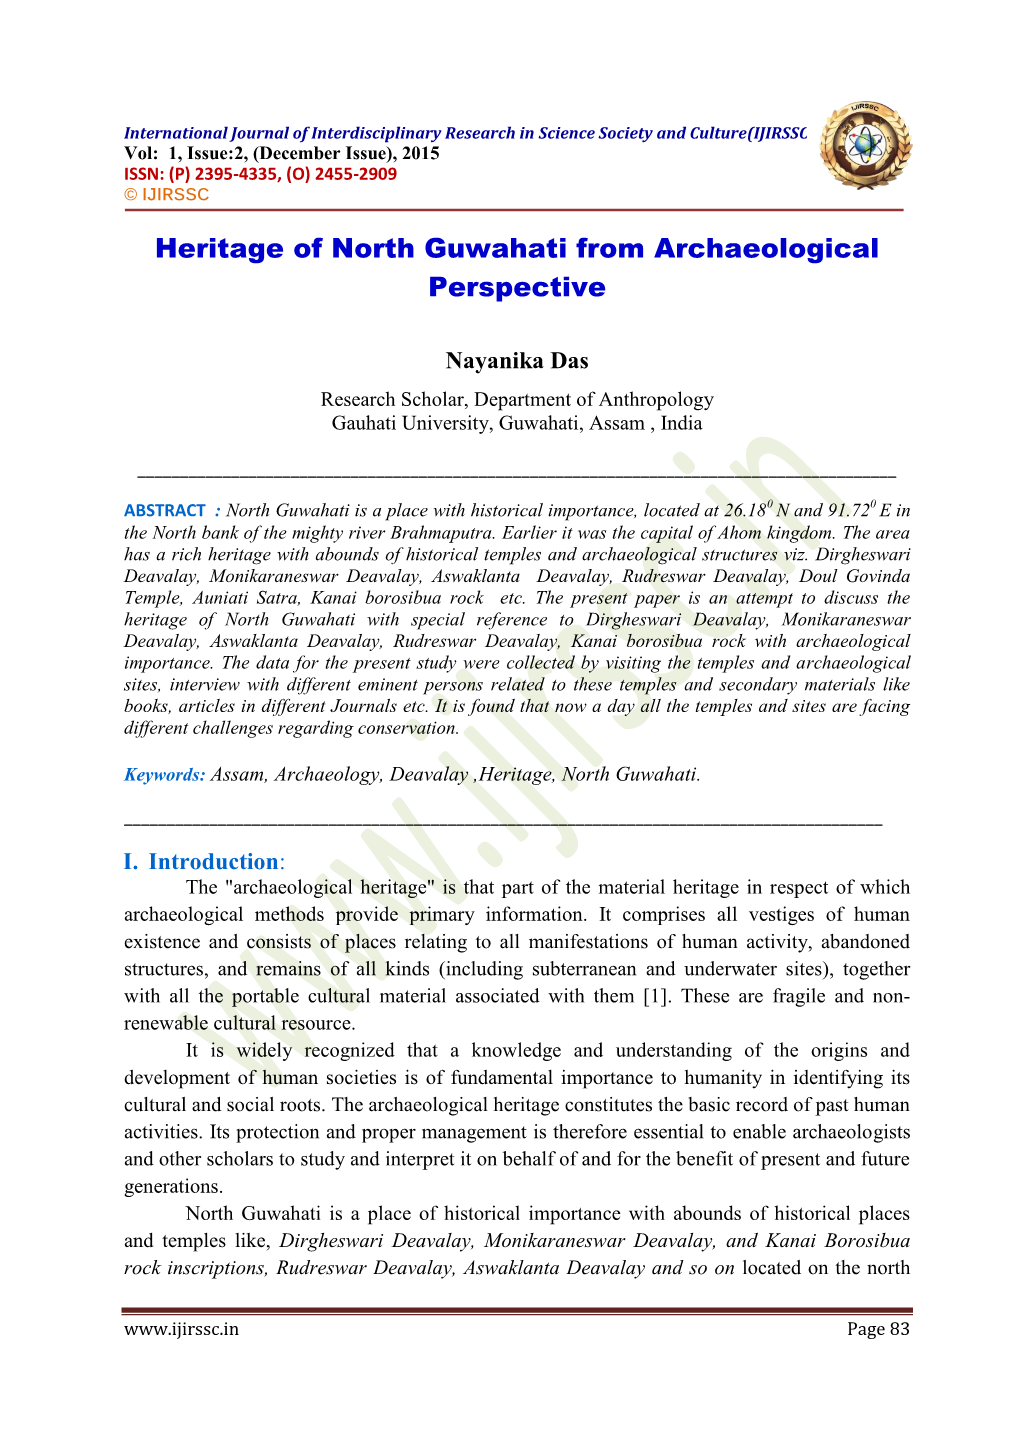 Heritage of North Guwahati from Archaeological Perspective